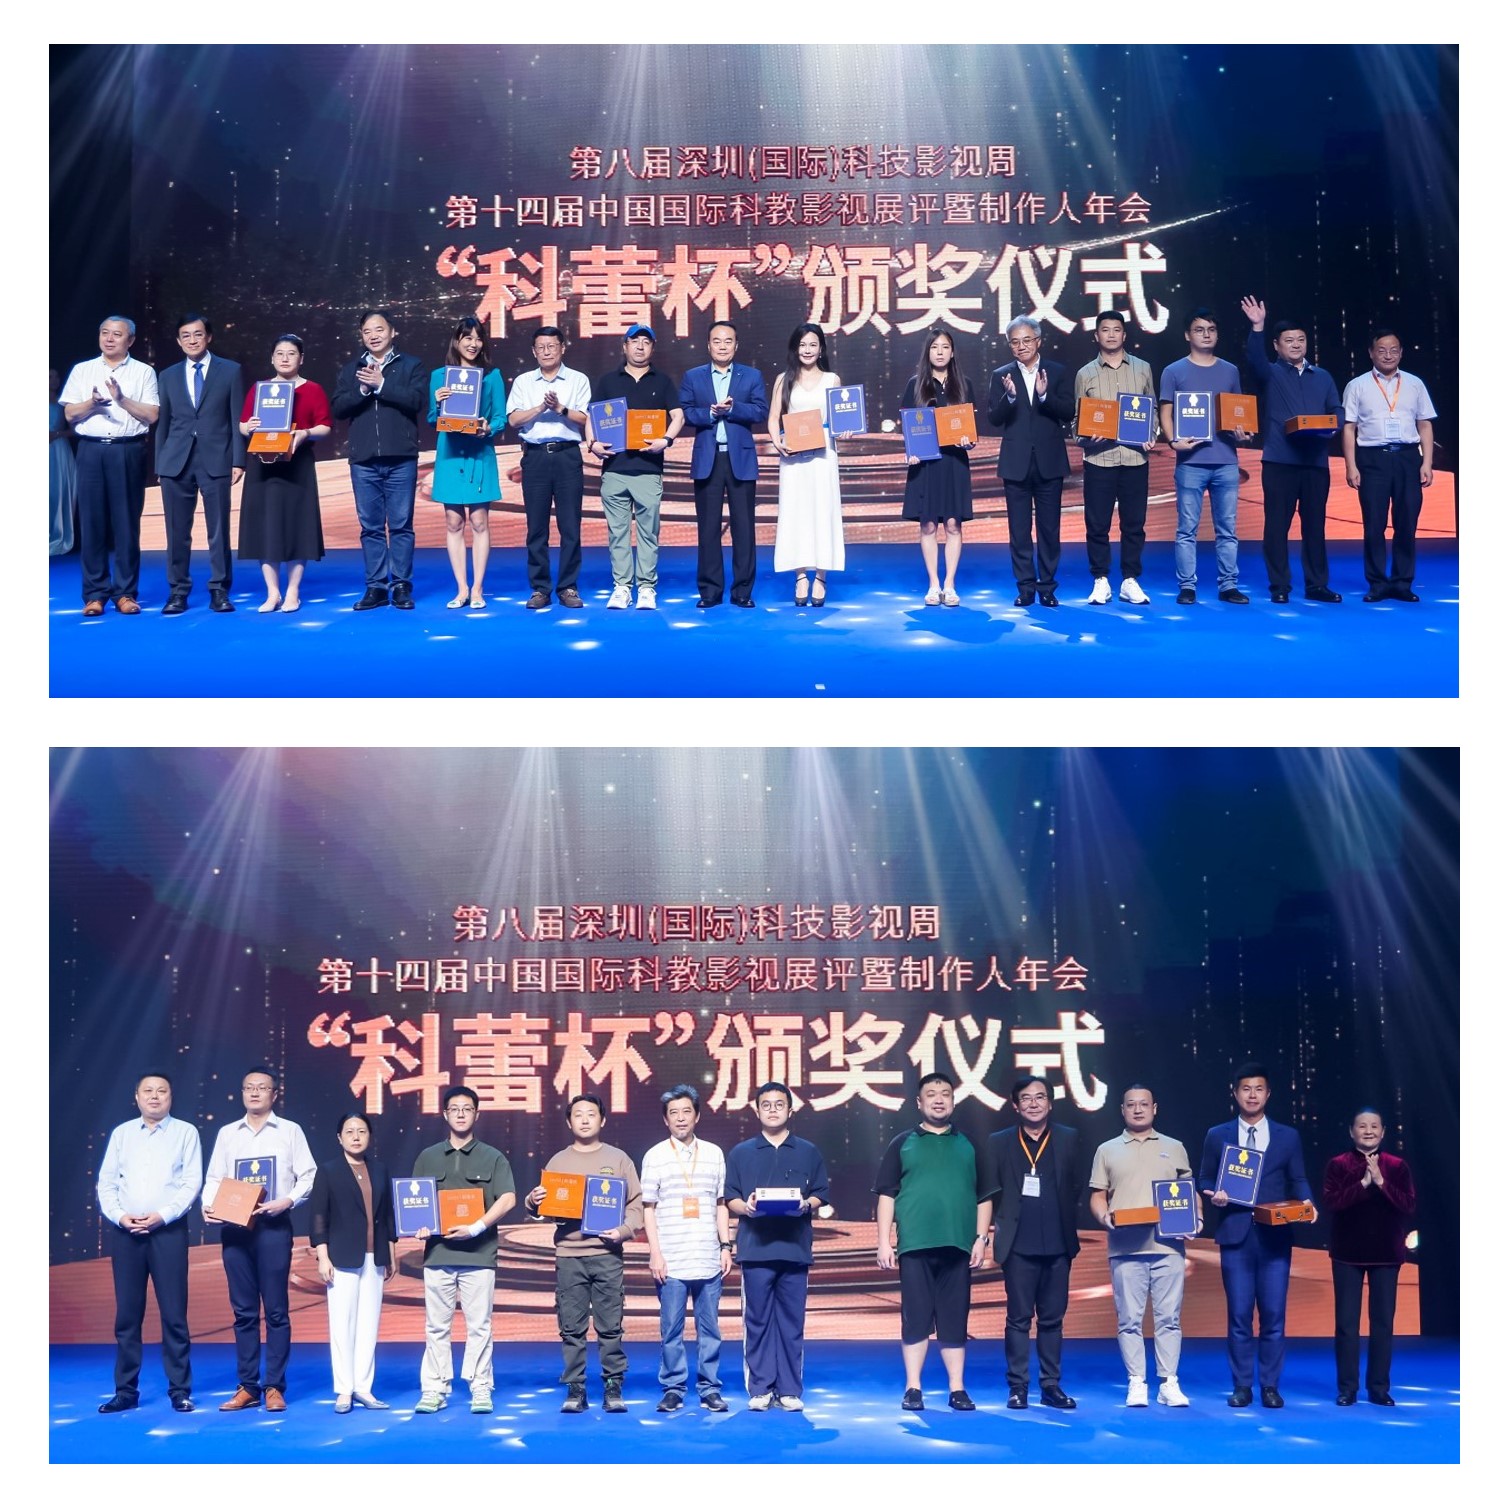 Mr Shun Chi-ming, former Director of the Hong Kong Observatory (top photo, second from left) and Dr Lai Wang-chun, Scientific Officer of the Observatory (bottom photo, second from right) attended the China Science Film and Video Kelei Cup award ceremony on 30 October 2023